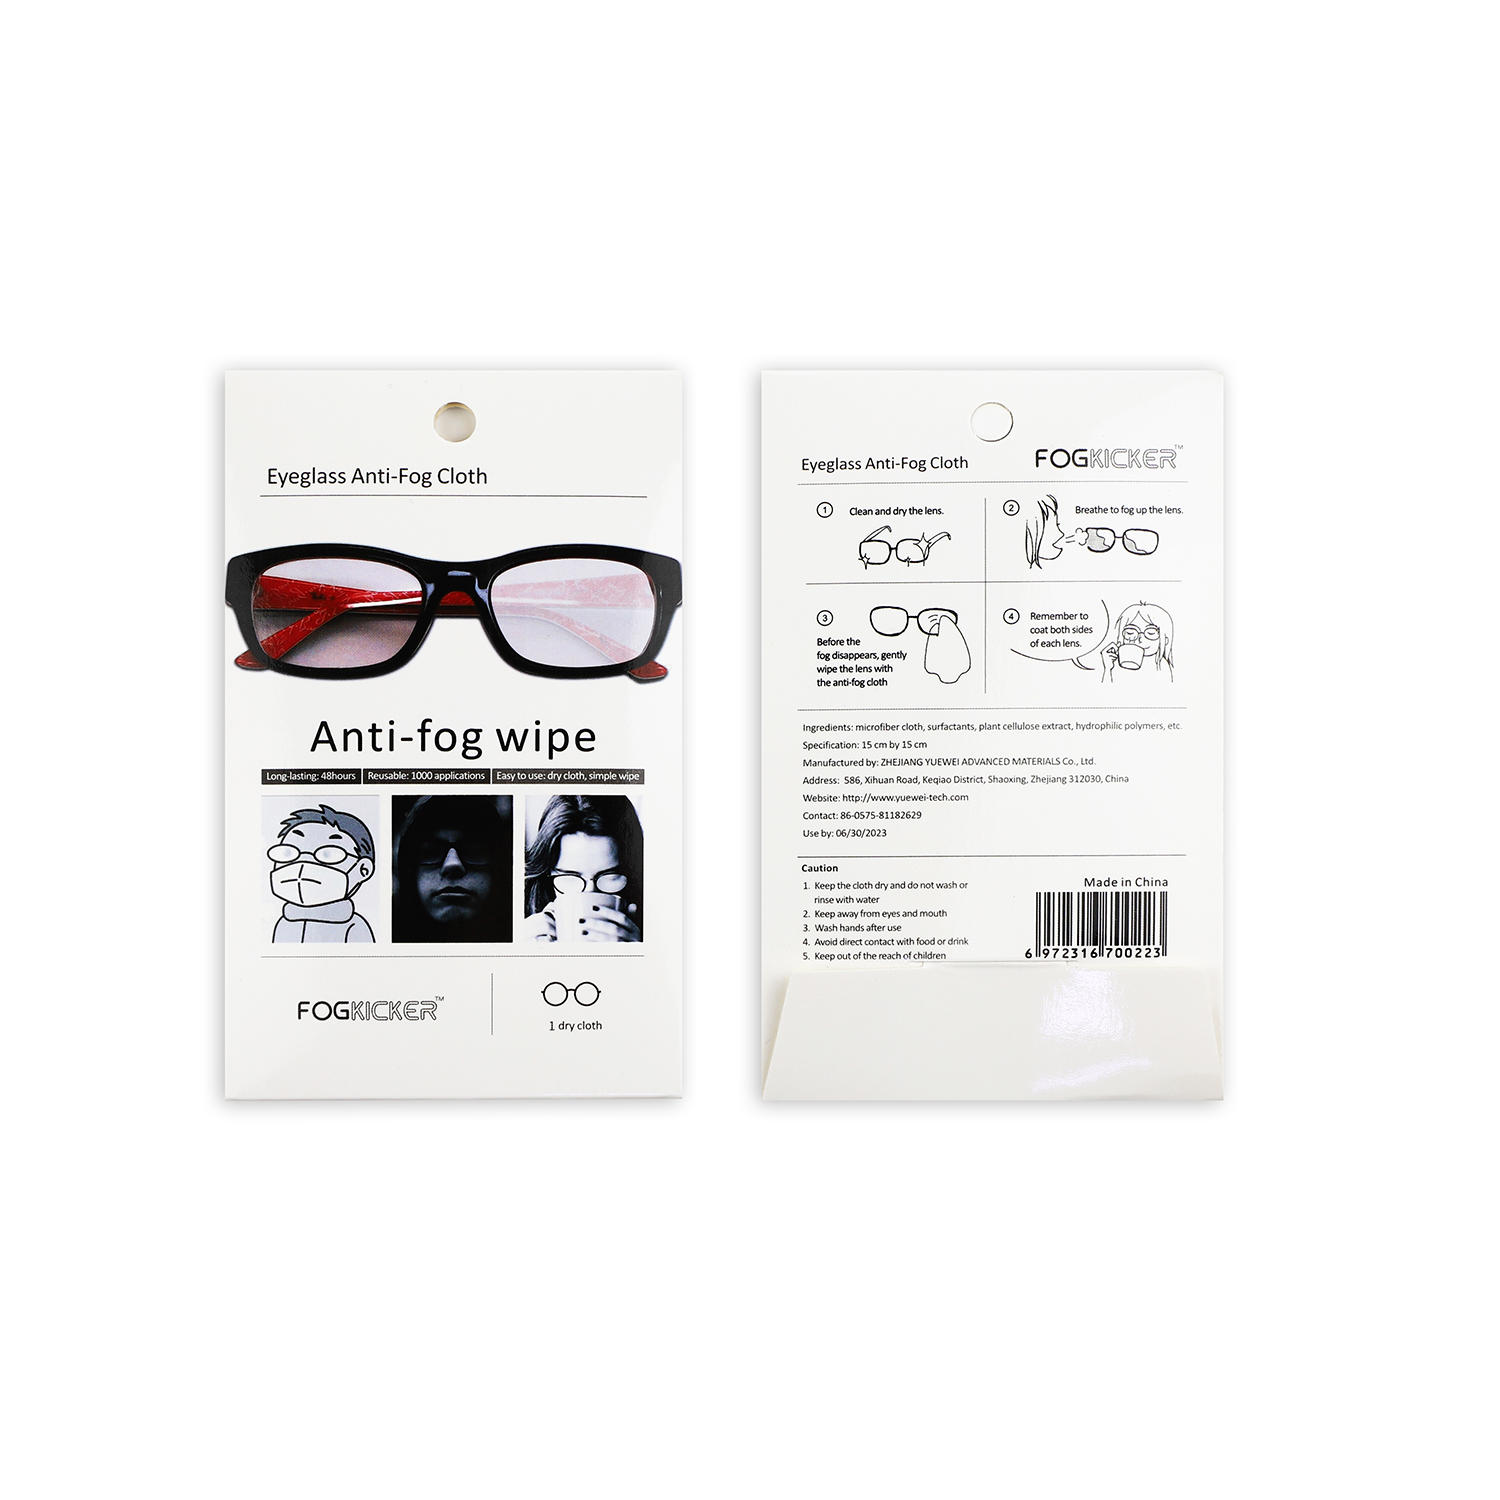 Anti-fog Lense Wet Wipes Manufacturer Cleaning Cloths for LED Touch Screen, iPhones, iPads, Computer Monitors Eyeglasses Camera Lenses Laptop